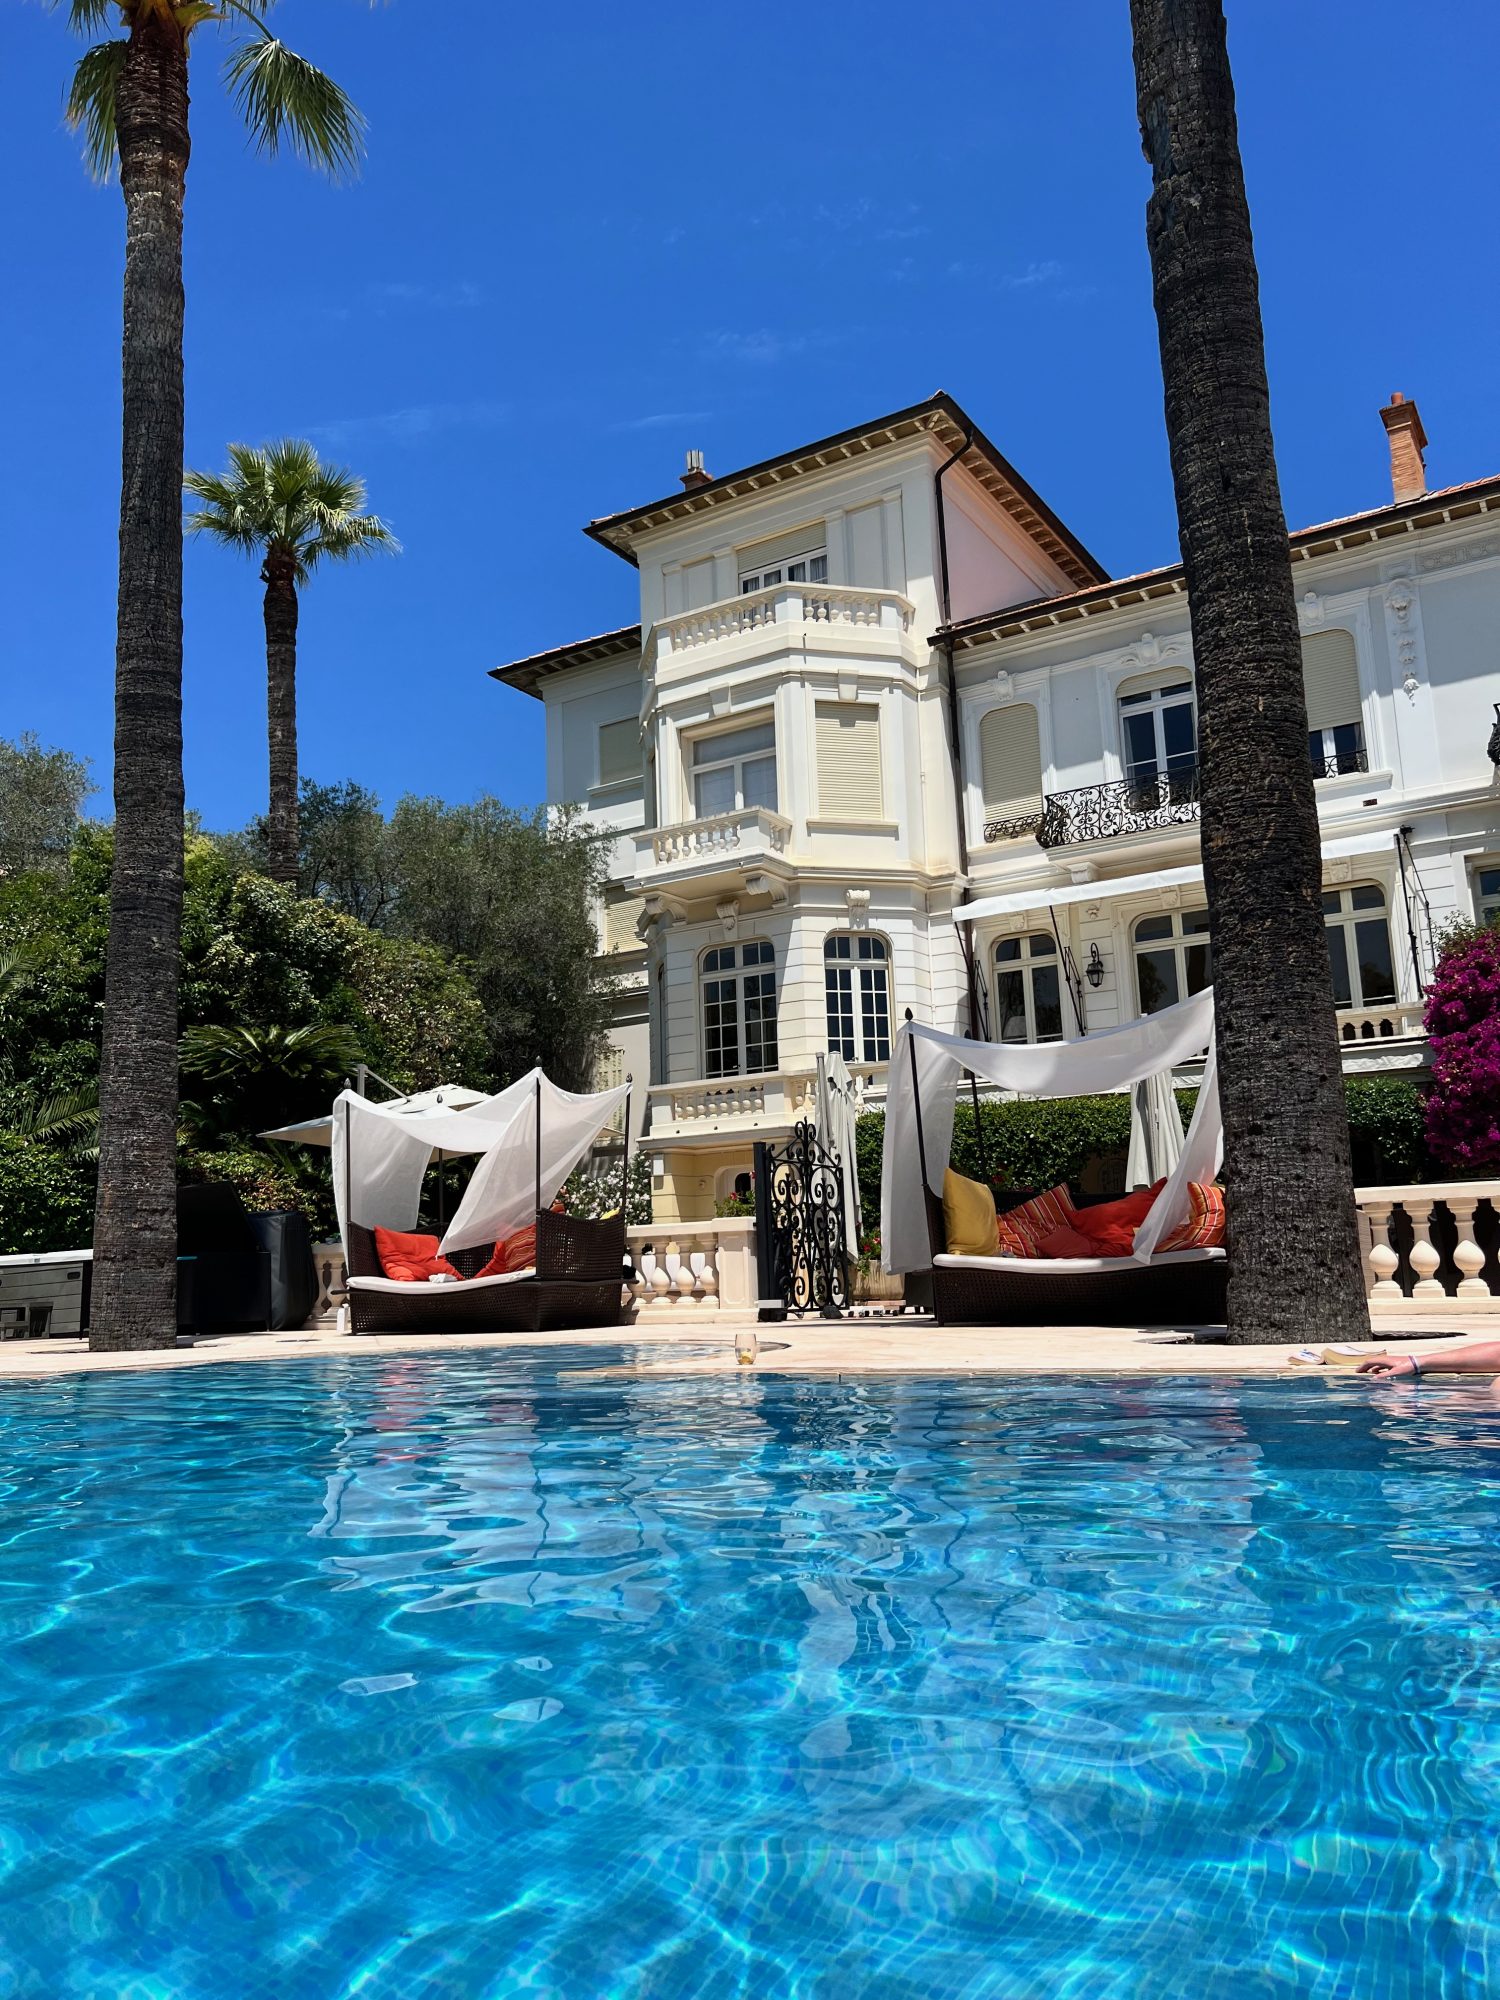 private pool overlooking a three story white villa in the French Riviera.